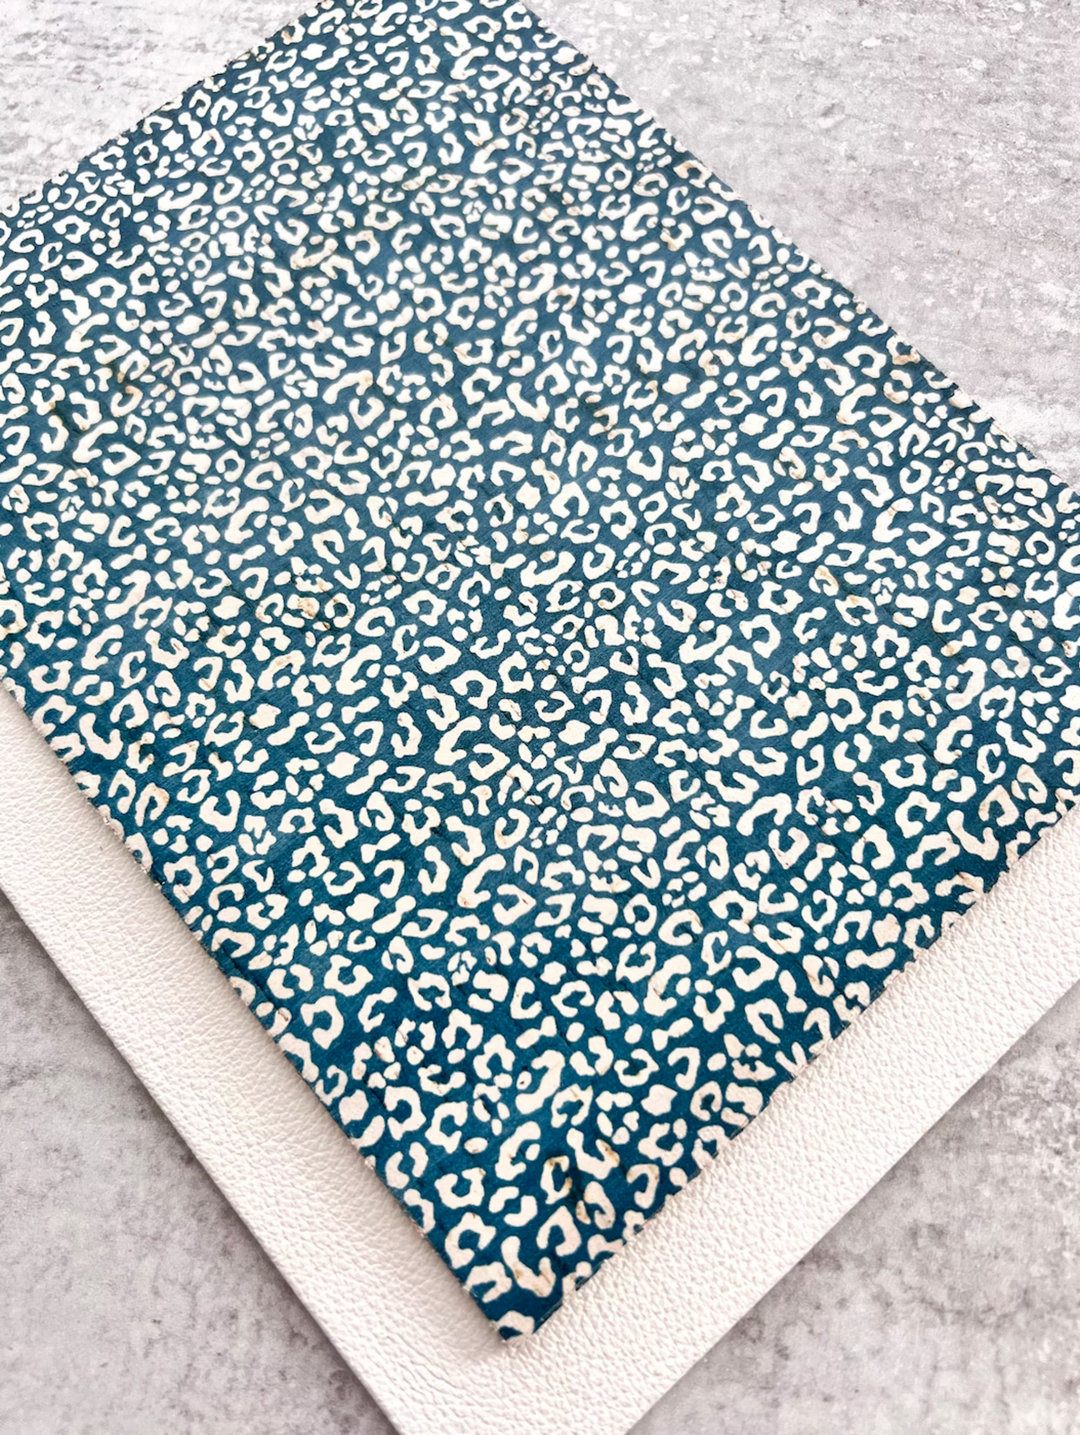 PRE ORDER Deep Turquoise Blue & White Leopard Leather Backed Cork Sheet for Earrings - Printed Genuine Leather